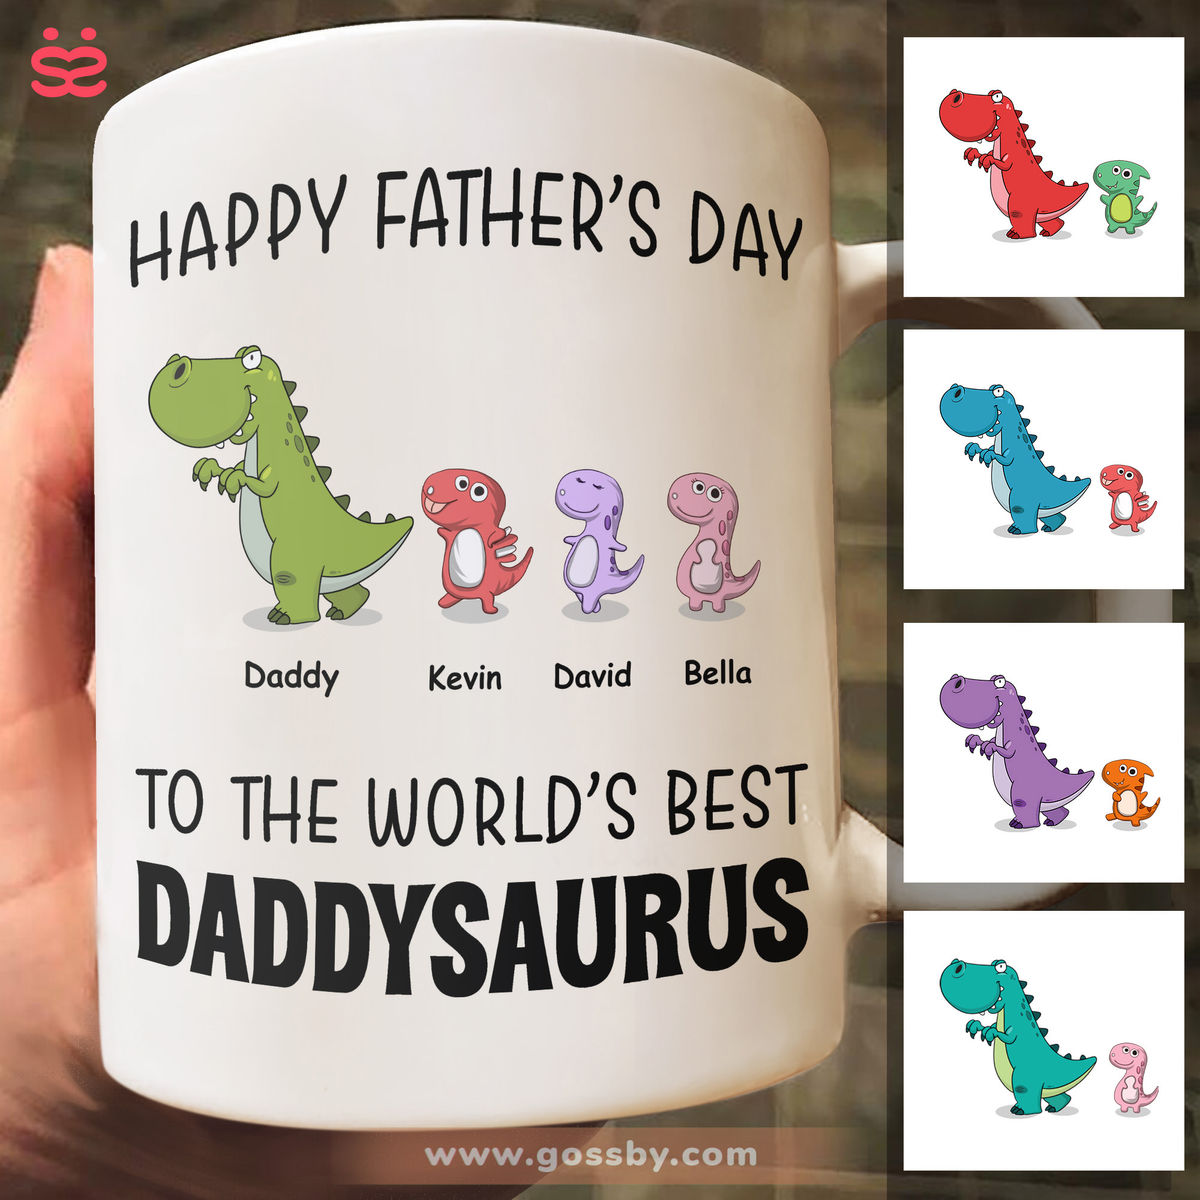 Happy Father's Day To The World's Best Daddysaurus